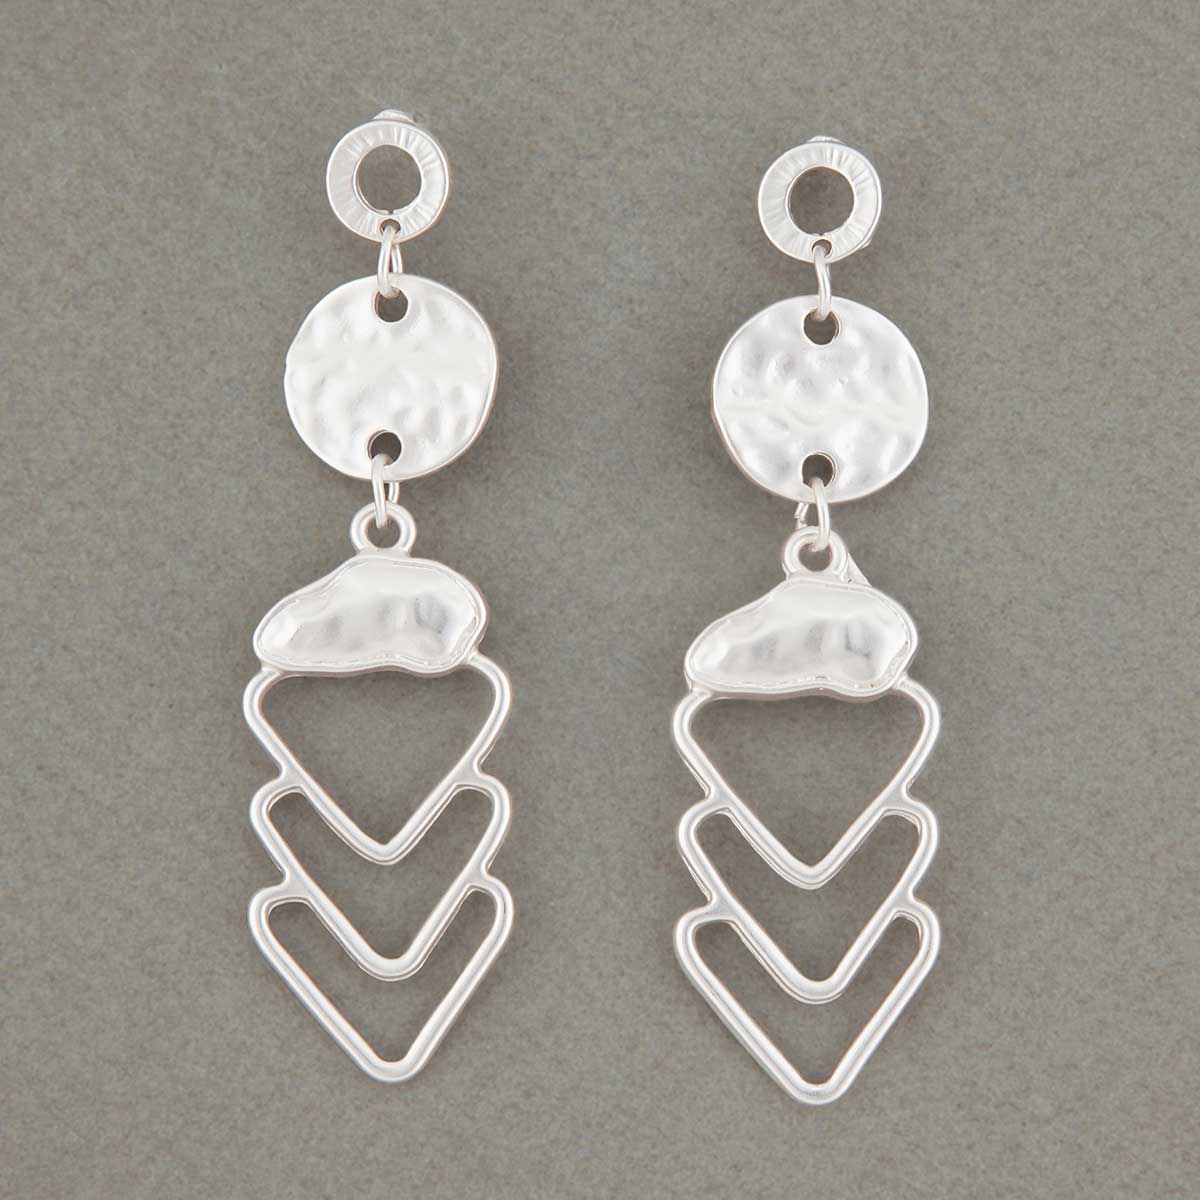 b50 EARRINGS TRIANGLE DROP .75IN X 2IN - Click Image to Close